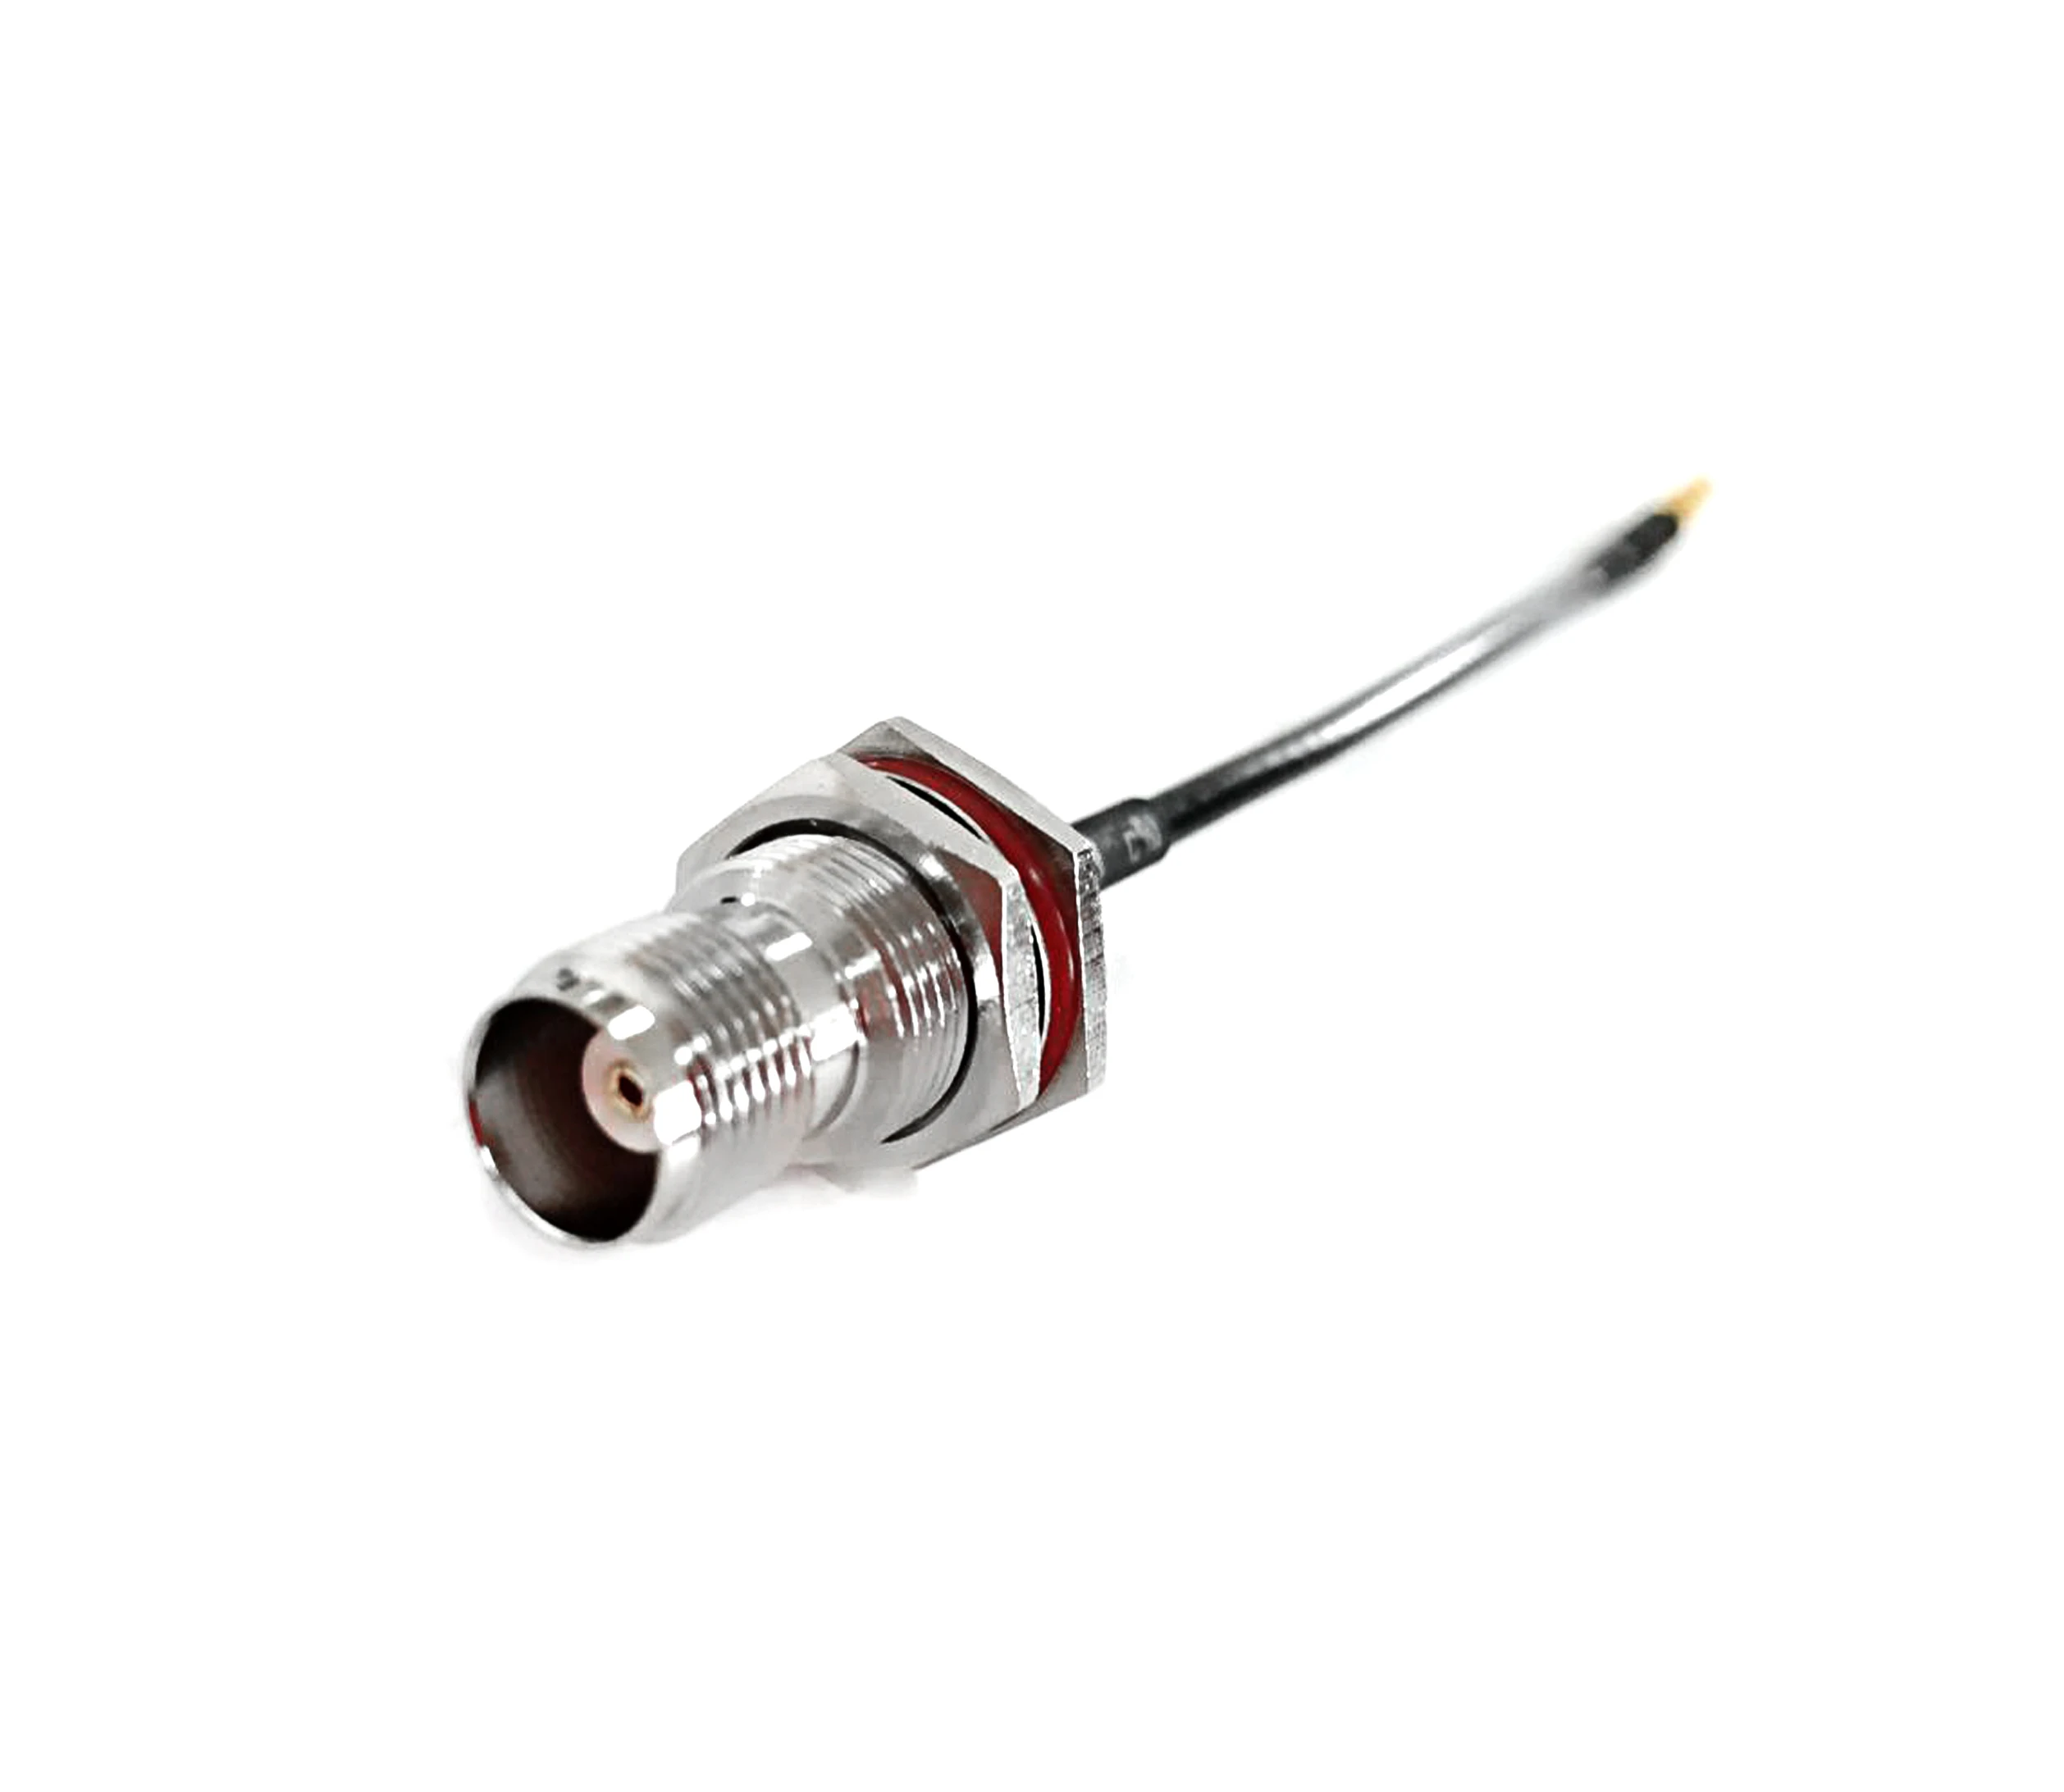 Customized RG174 Coaxial Cable Black Wire Attach BNC TNC SMA SMB Fakra TS9 UHF N Connectors Antenna Cable details